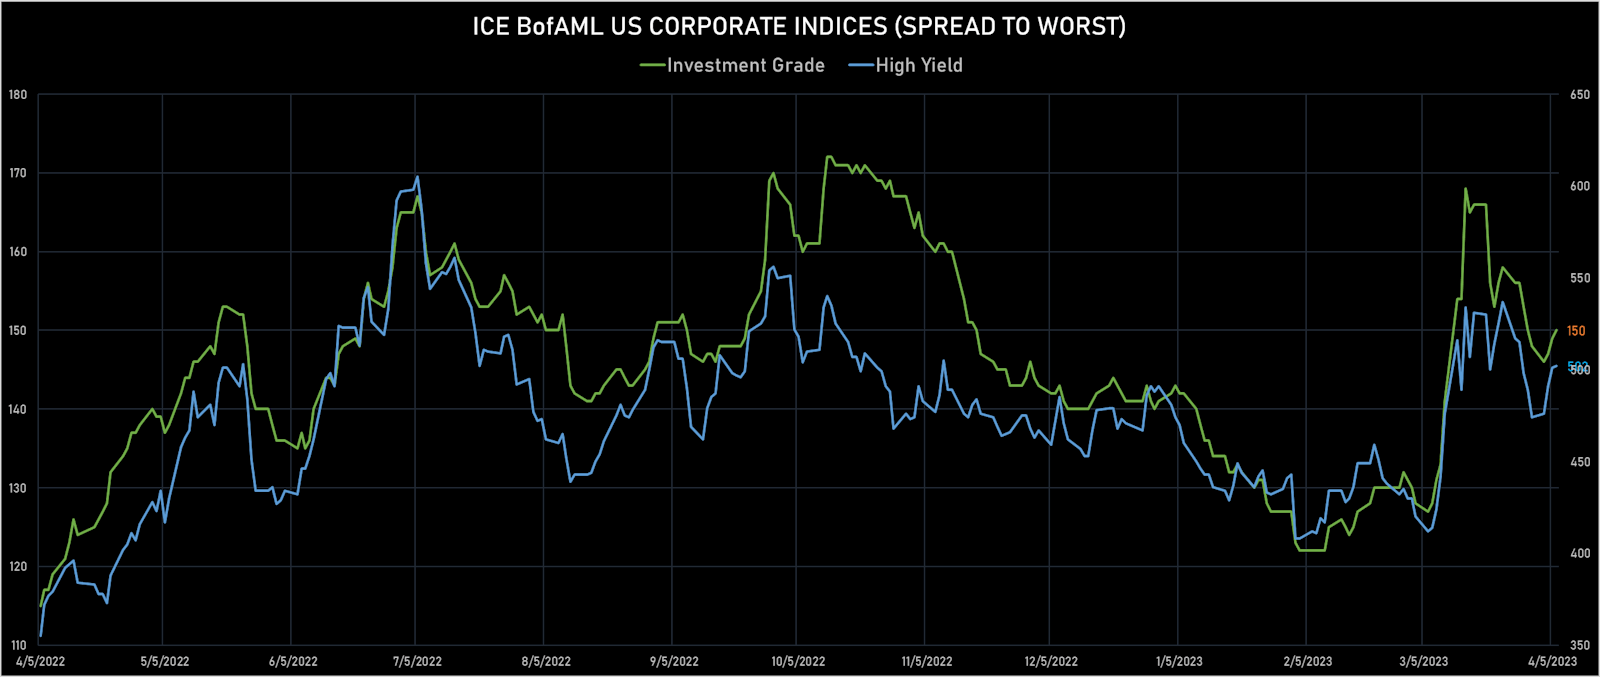 ICE BofAML US IG & HY Spreads To Worst | Sources: phipost.com, Refinitiv data